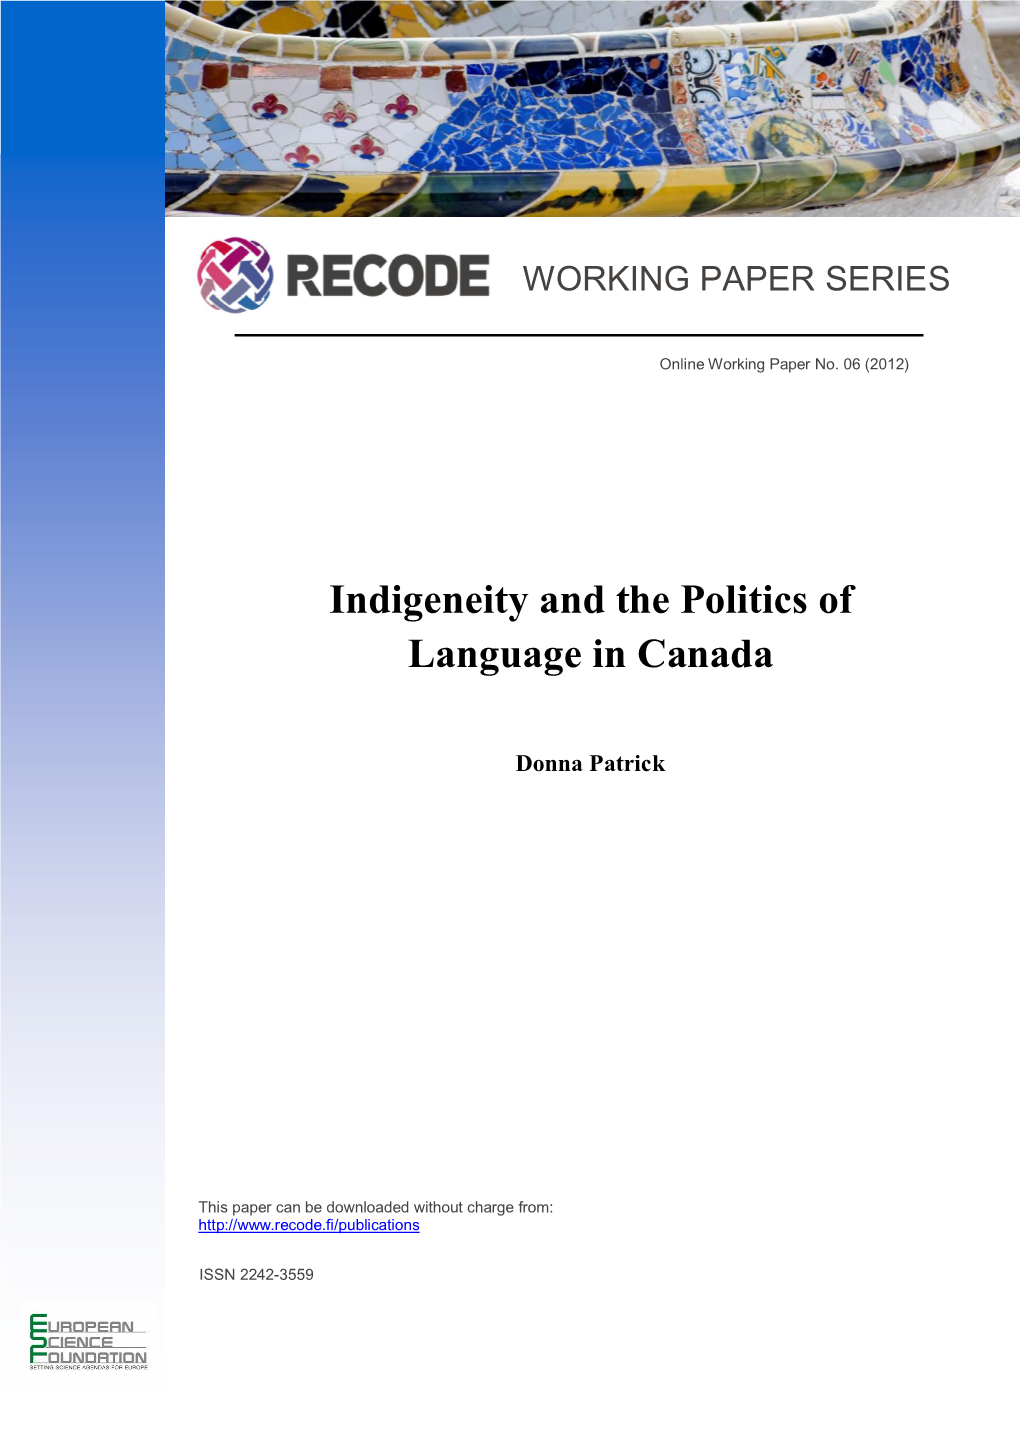 Indigeneity and the Politics of Language in Canada